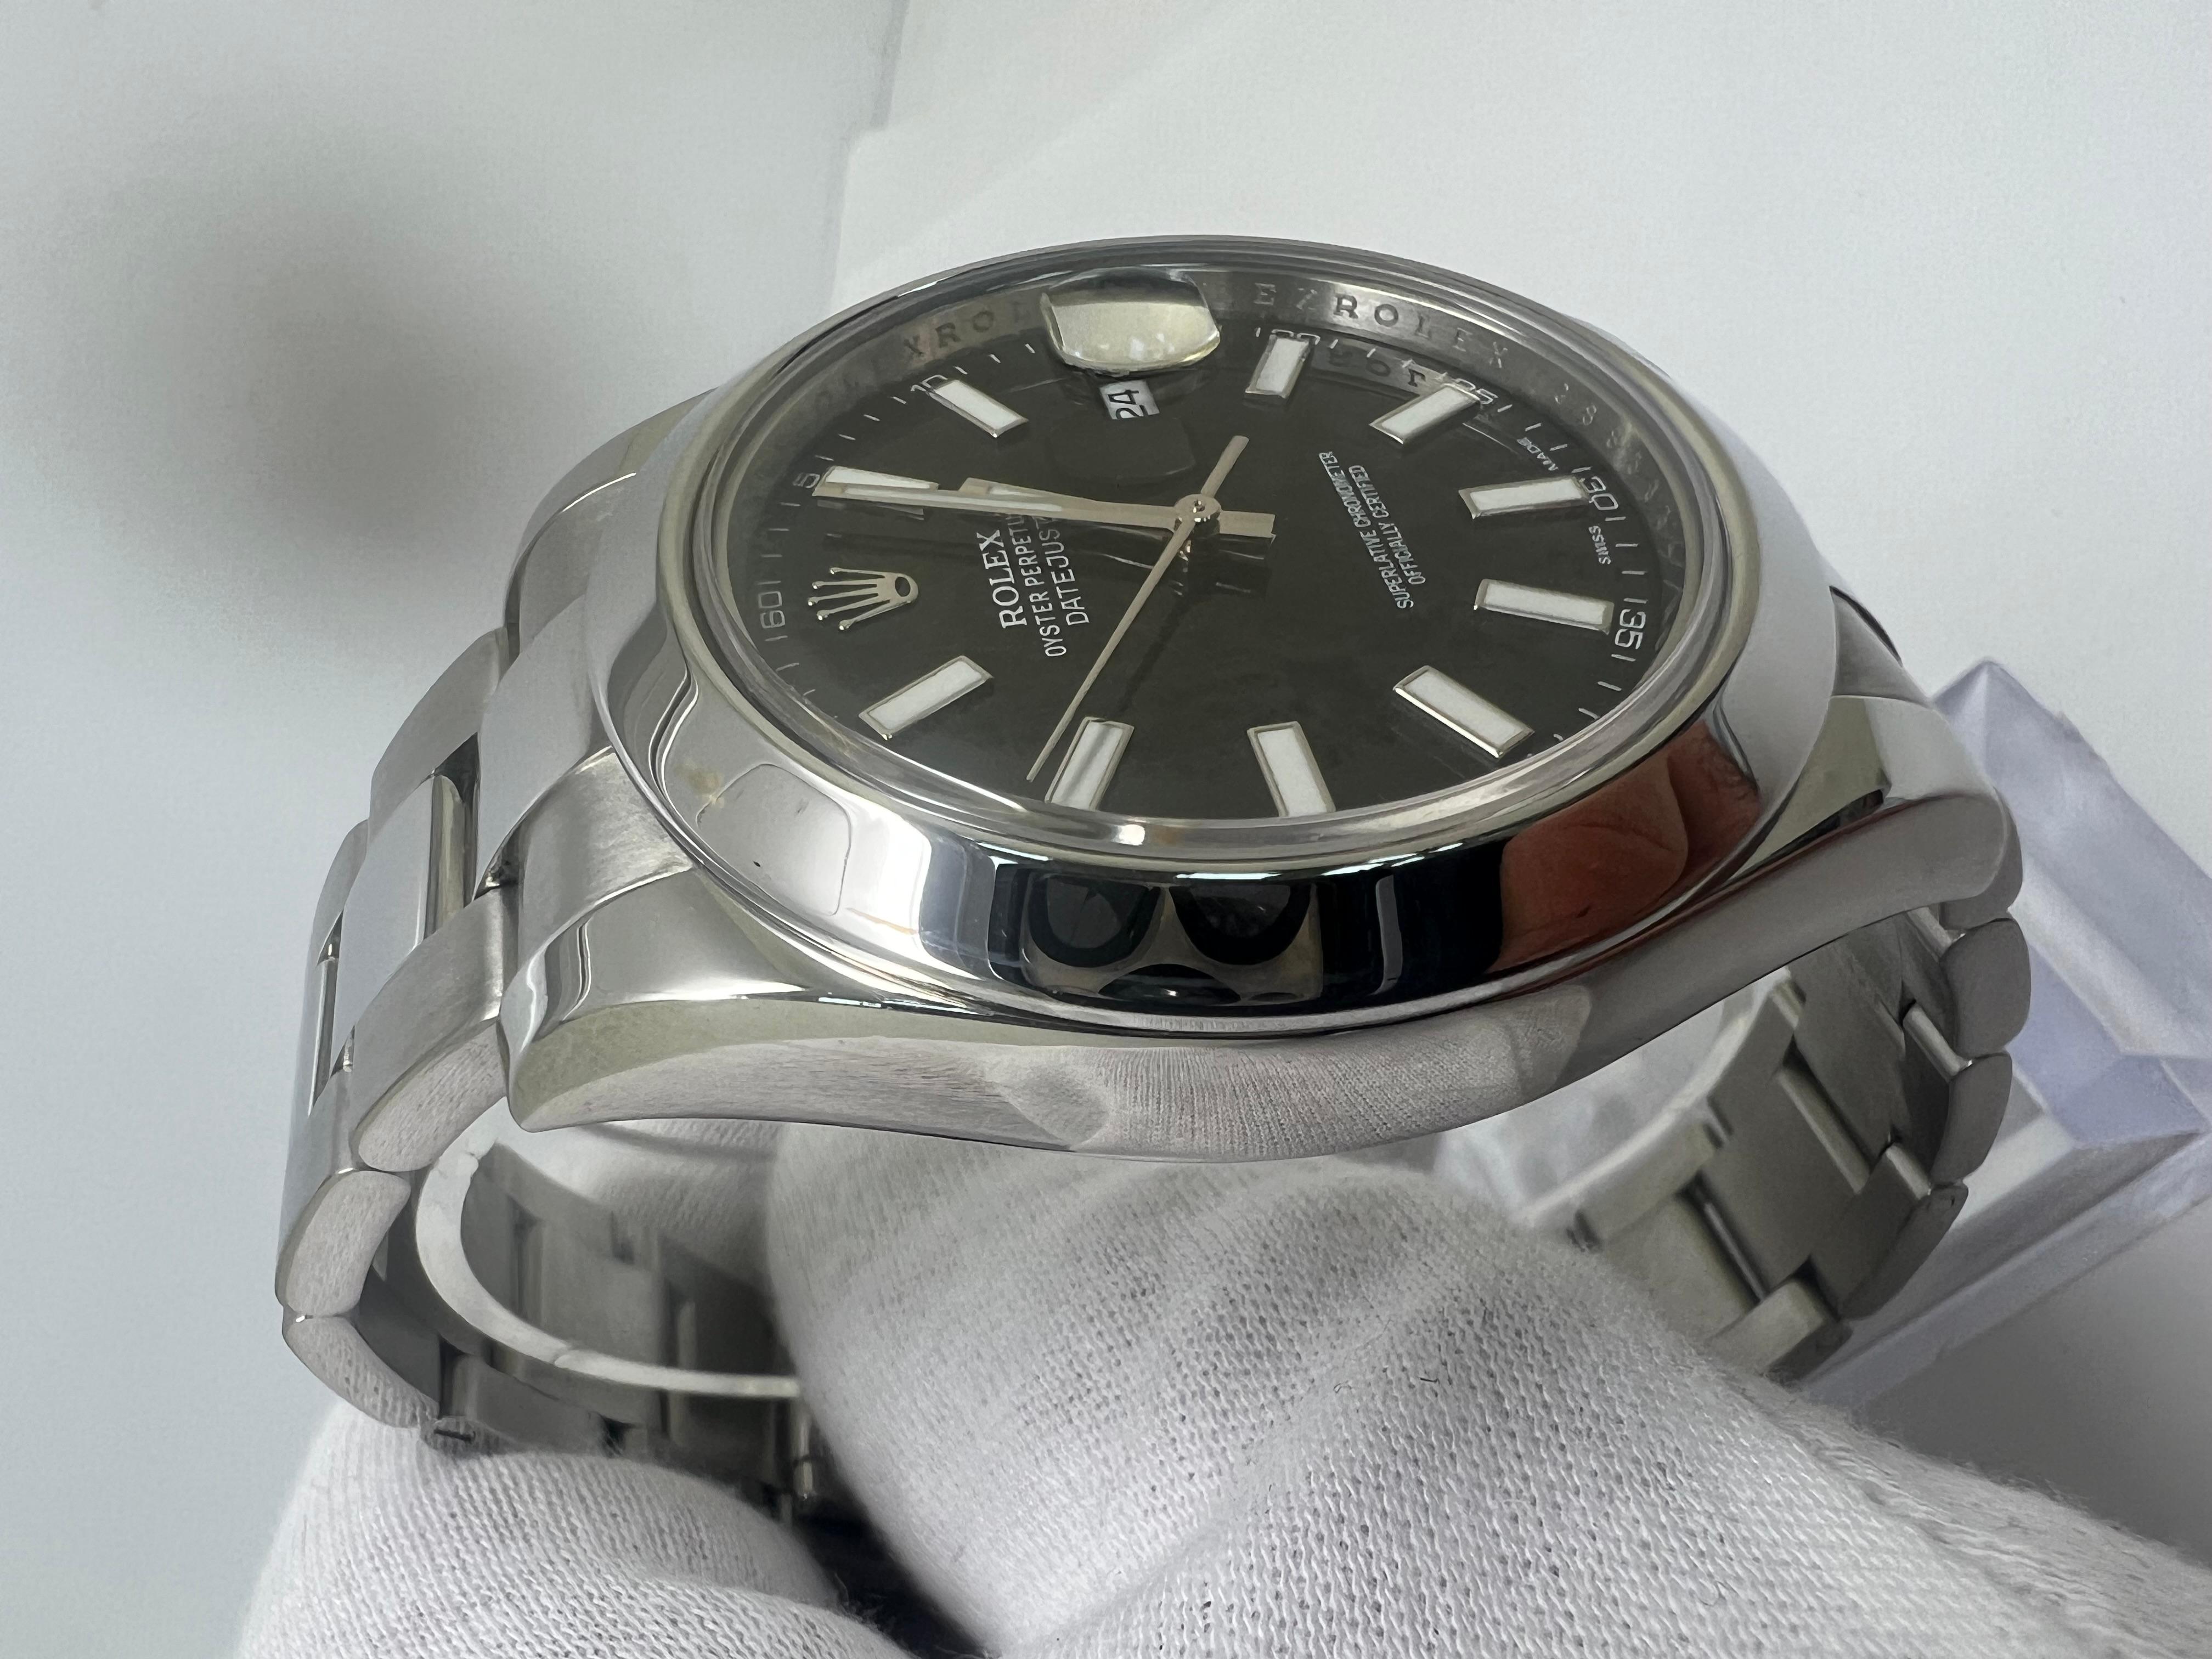 Rolex Datejust II Black Men's Watch - 116300

excellent condition

all original Rolex parts!

comes with Rolex Box and certificate

free overnight shipping

shop with confidence 

Evita Diamonds